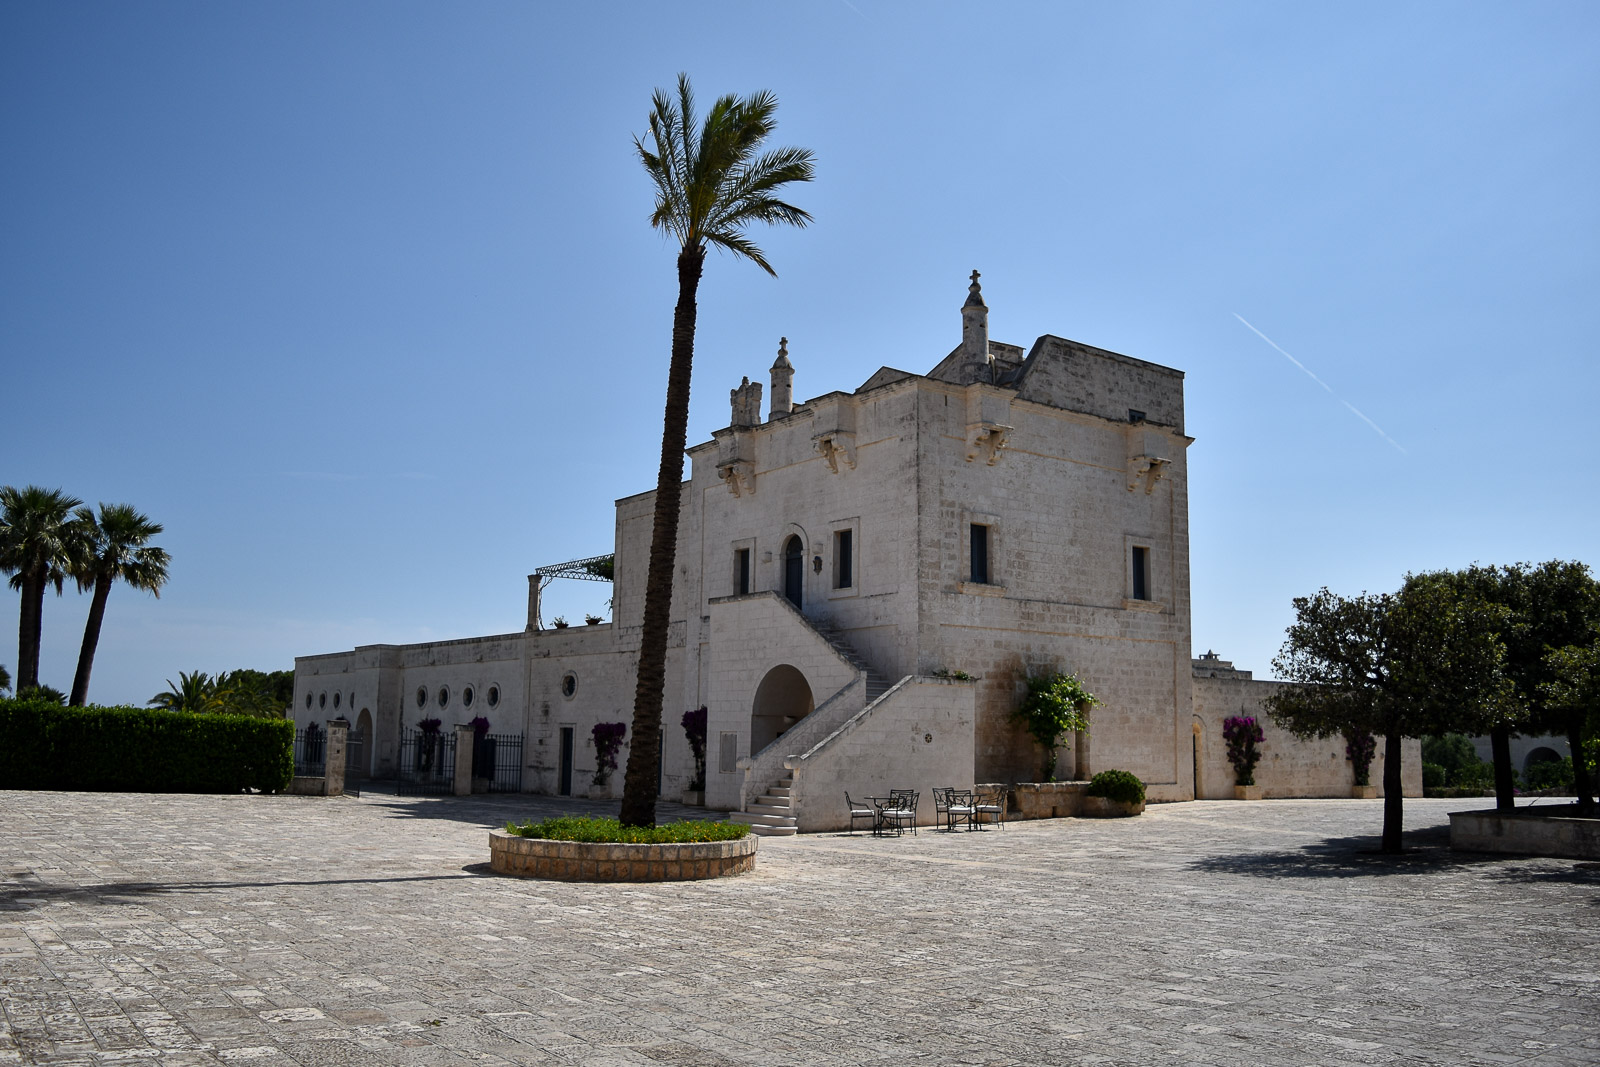 The elegant buildings of Masseria San Domenico - once a watch tower.